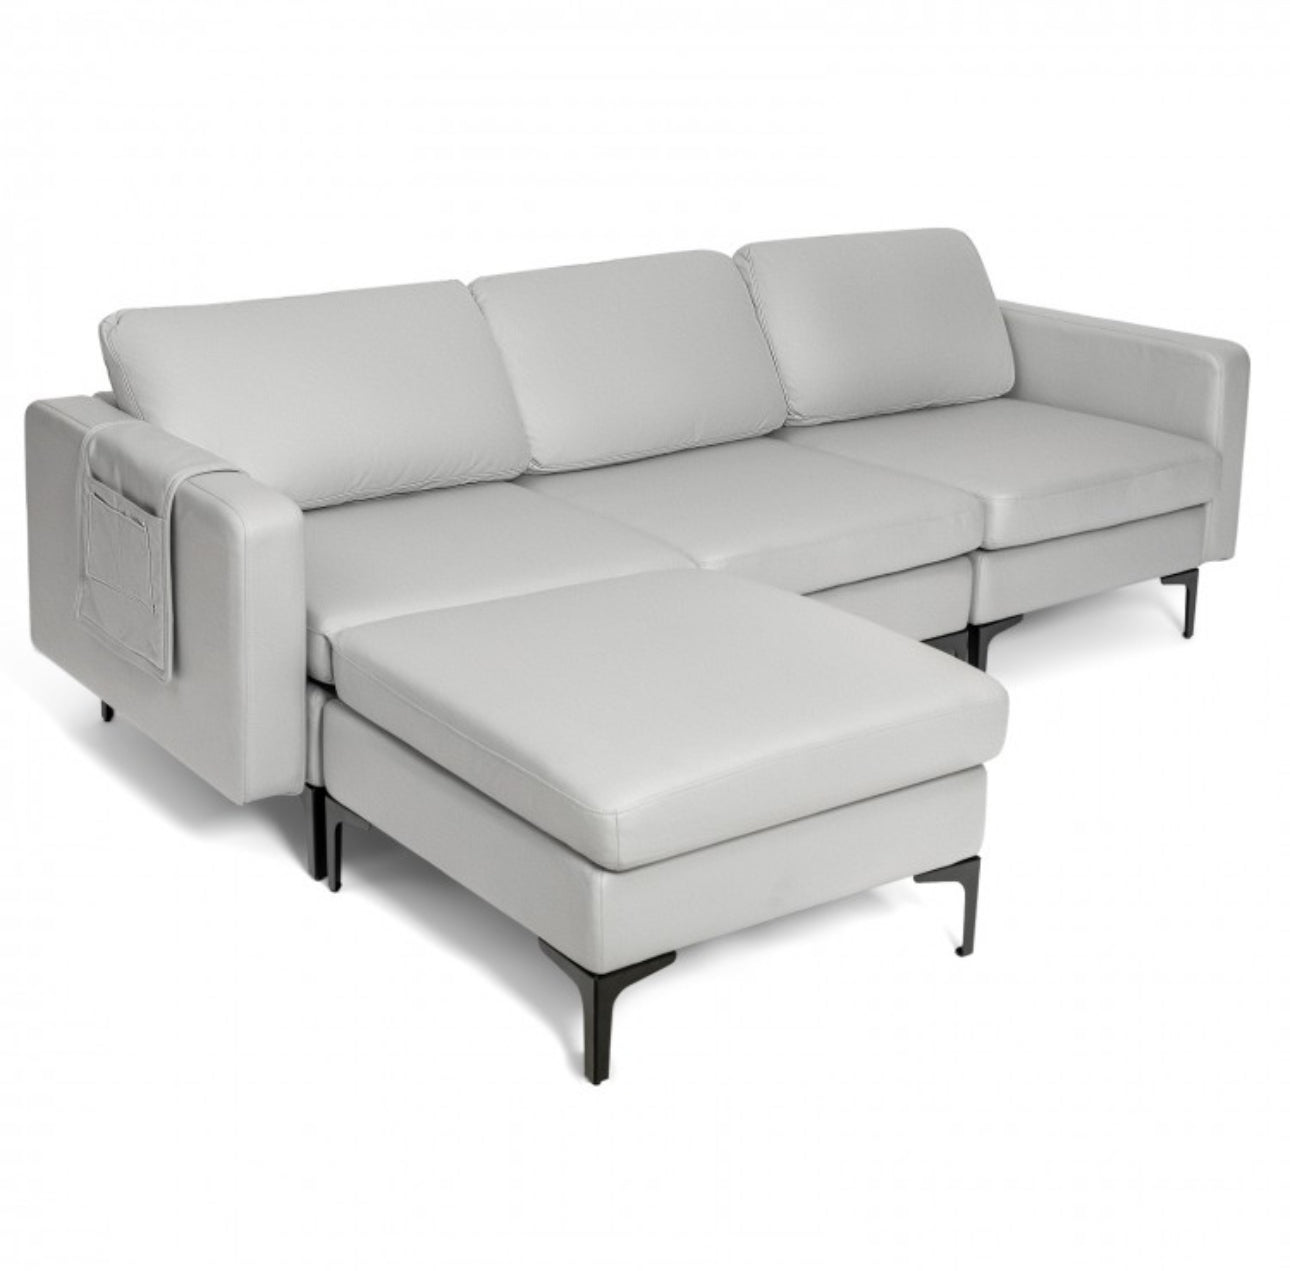 Elegant Modern Heavy Duty Comfortable L-Shaped Sectional Sofa Couch With Reversible Chaise | 2 USB-Ports | Thick Seat Cushions | Ottoman